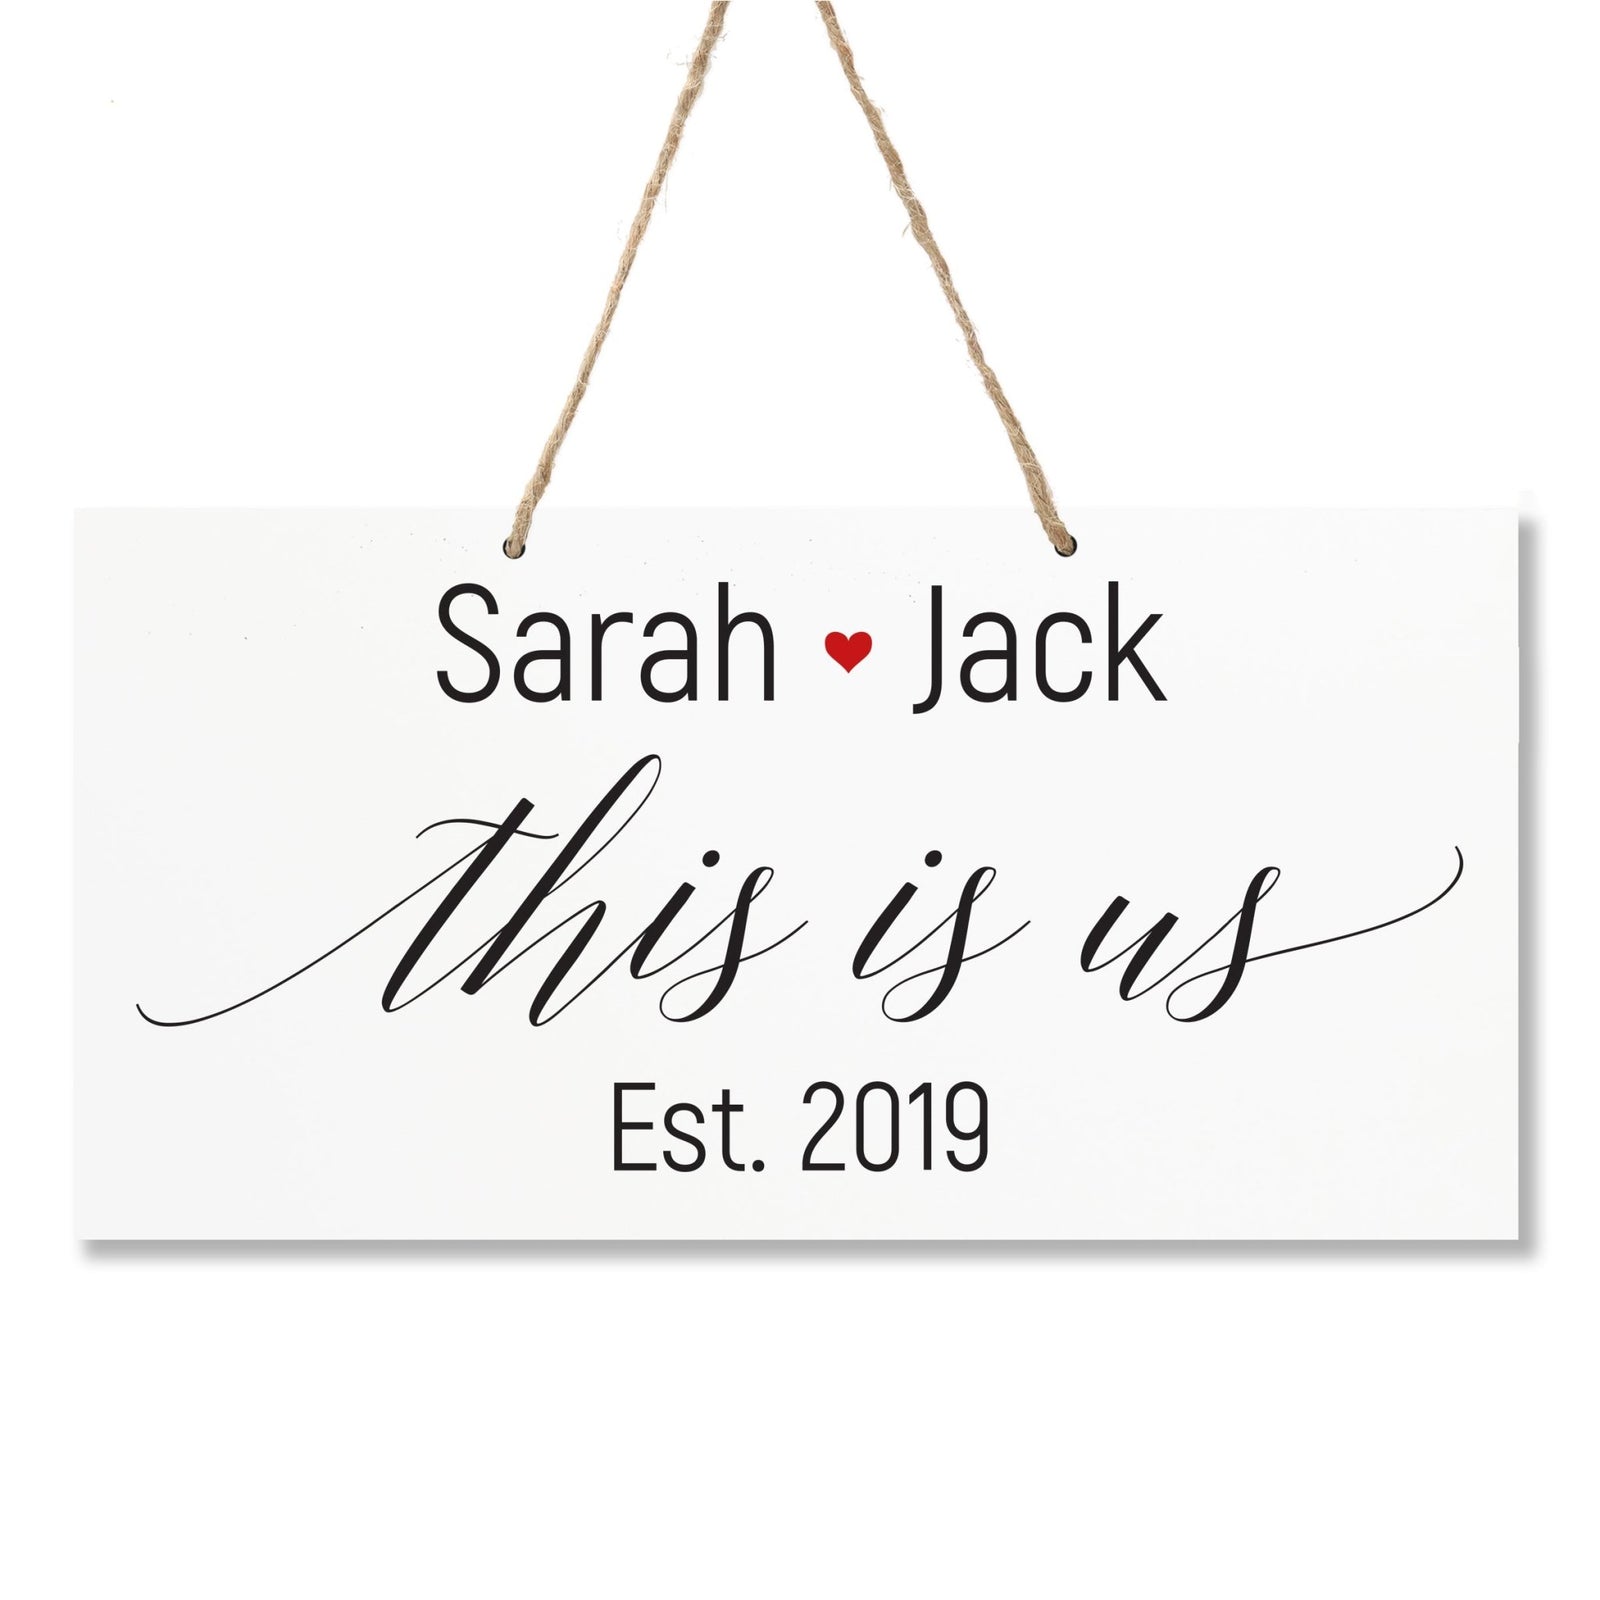 Personalized Family Name Sign For New Home - This Is Us - LifeSong Milestones